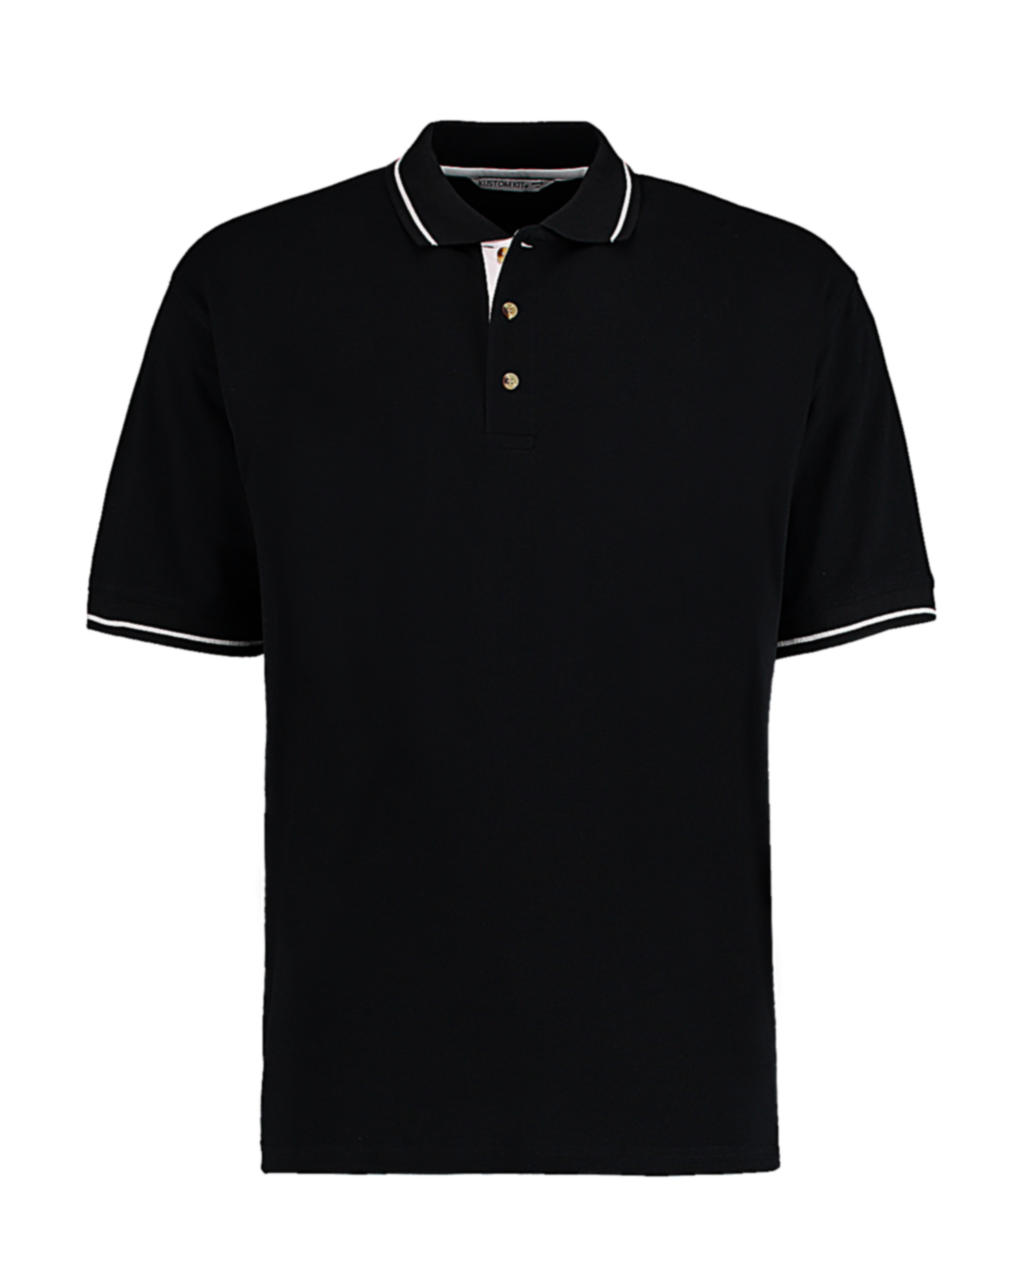  Mens Classic Fit St. Mellion Polo in Farbe Black/White